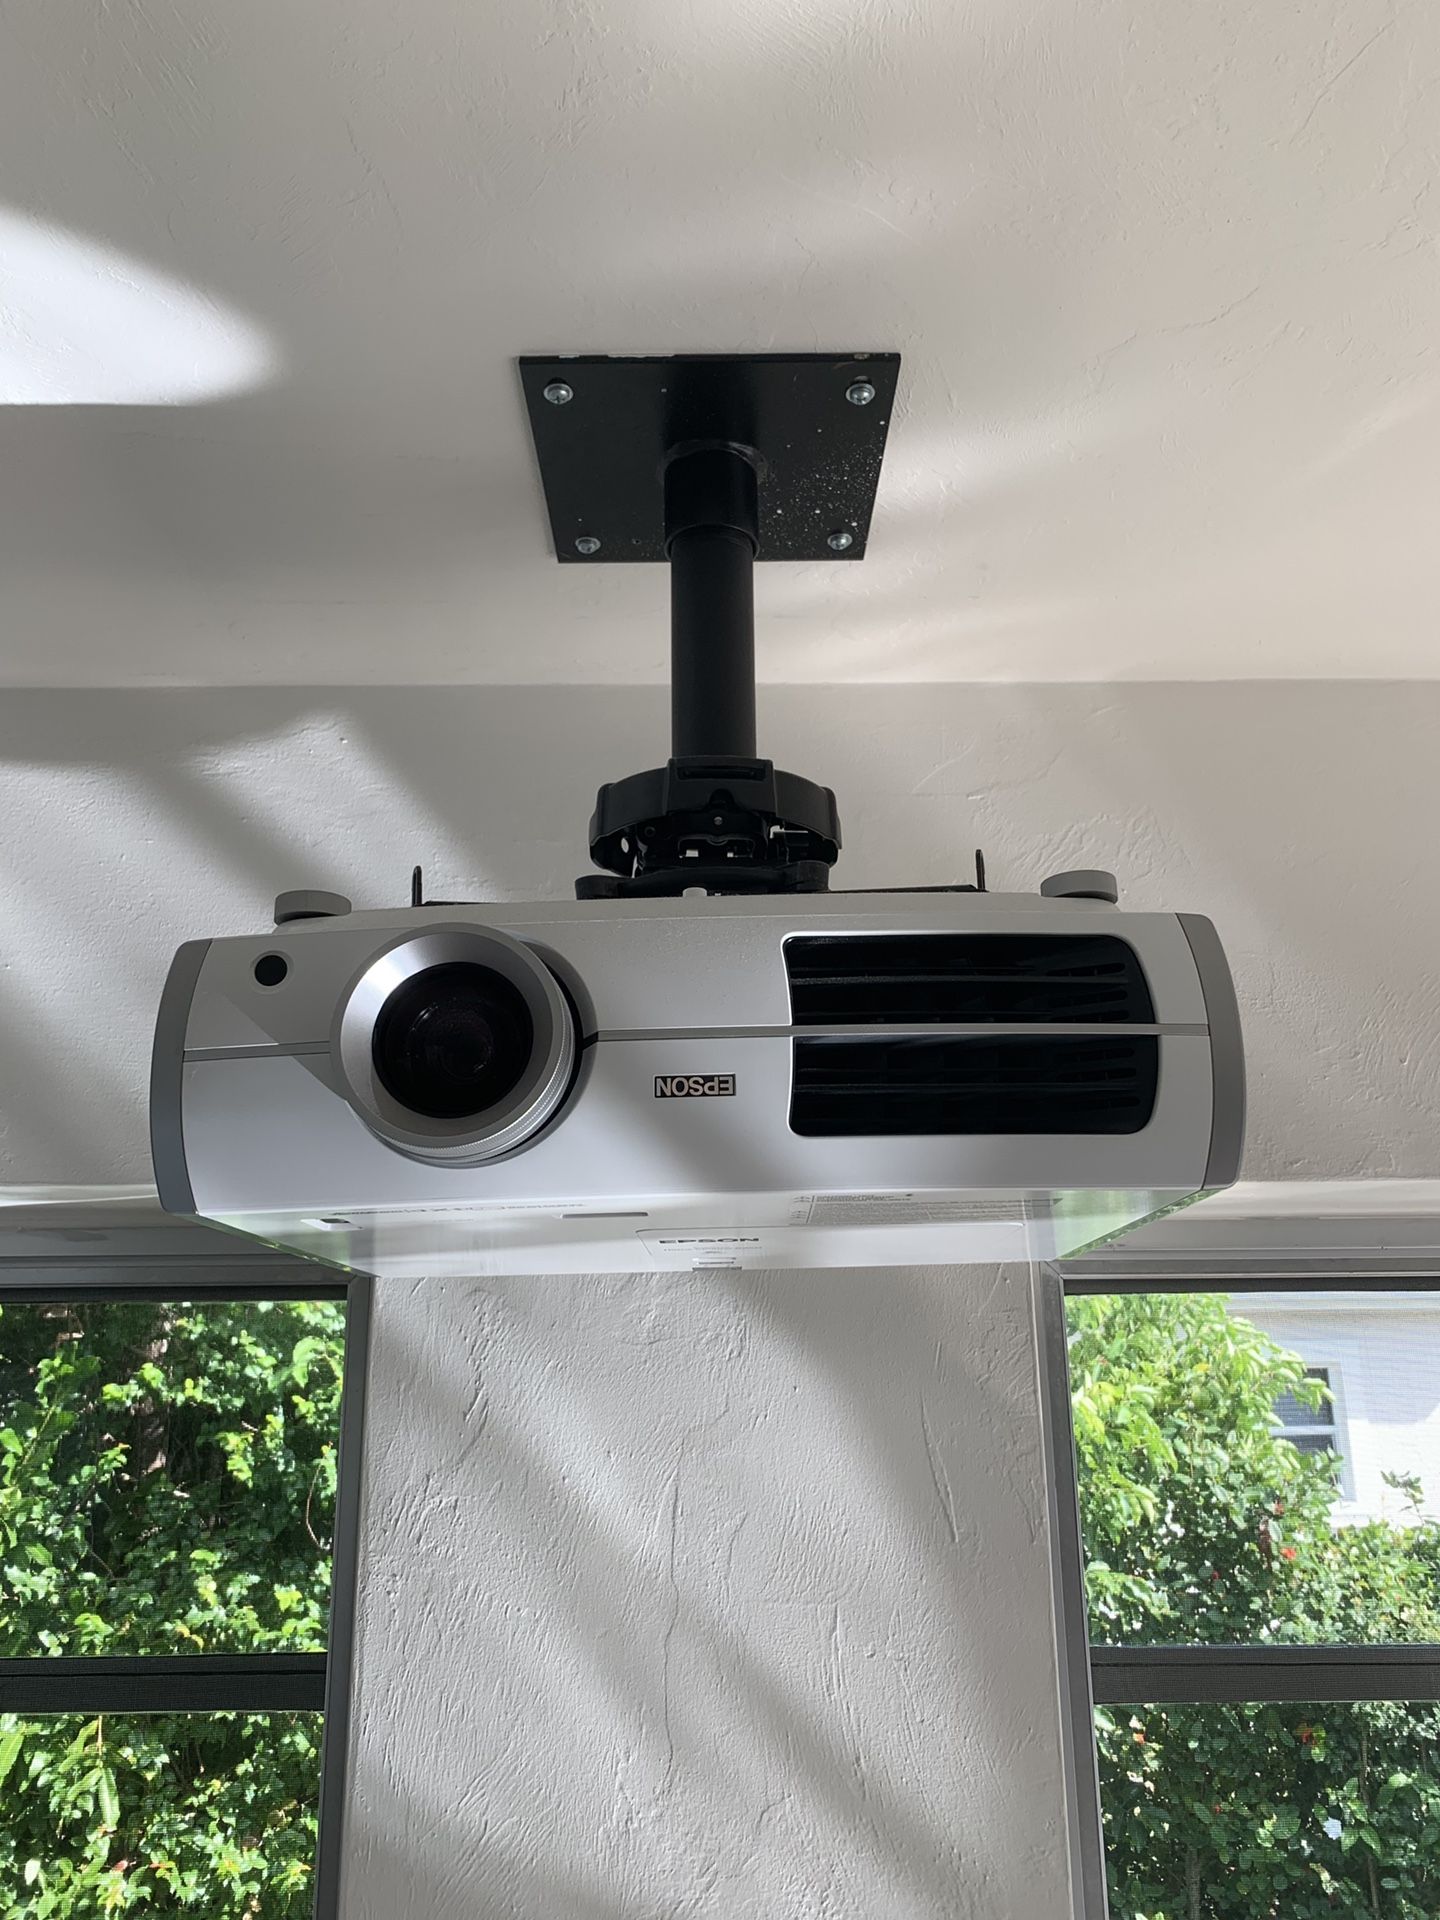 Epson projector 8350 Home Cinema & ceiling mount